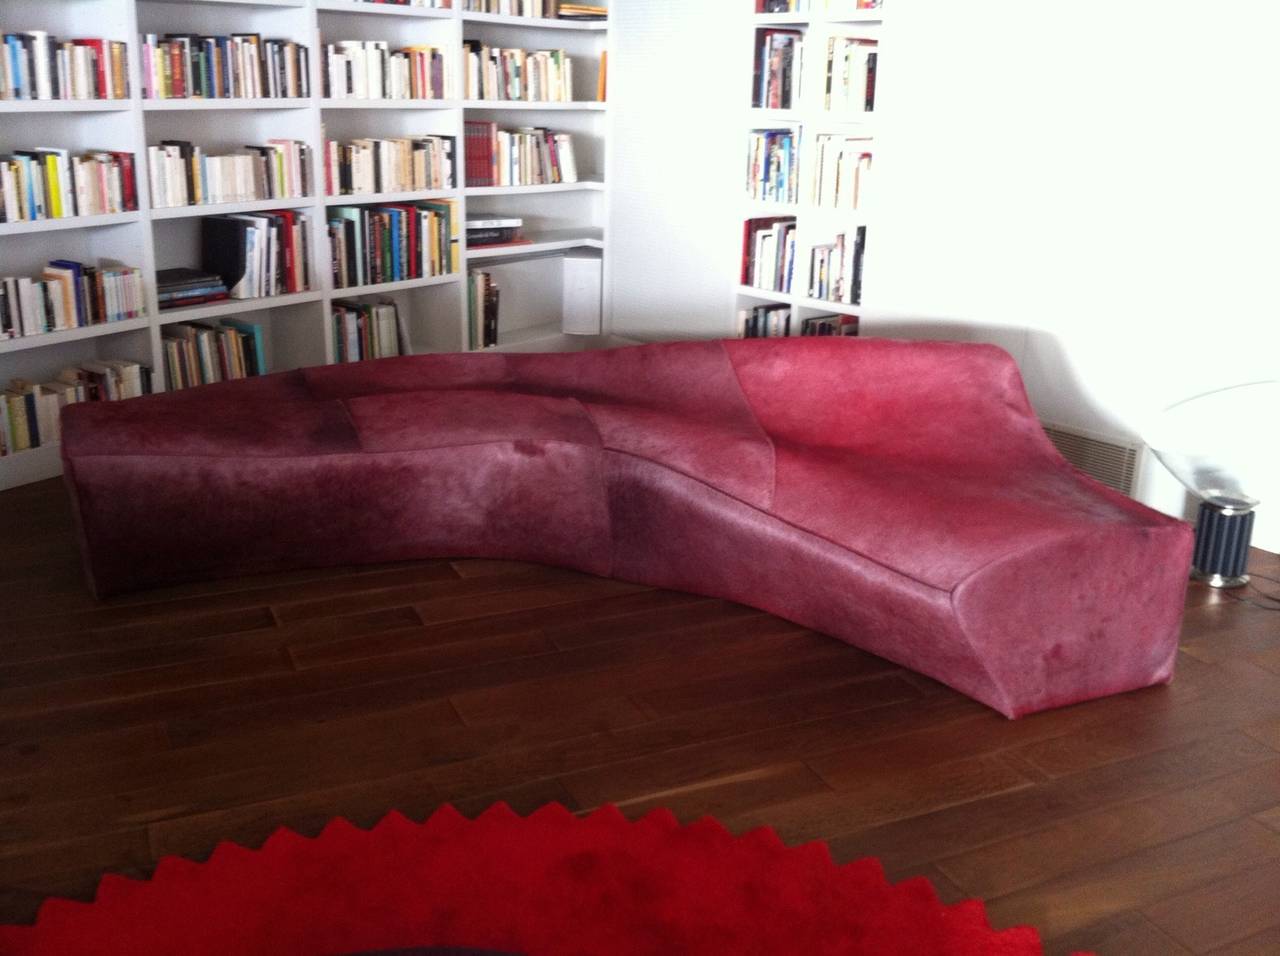 Rare contemporary 'Moraine' sofa by Zaha Hadid design United Kingdom 2000 and produced by Sawaya & Moroni in Italy circa 2004.

This bespoke sofa is held in corporate, private and institutional collections worldwide including die Neue Pinakothek